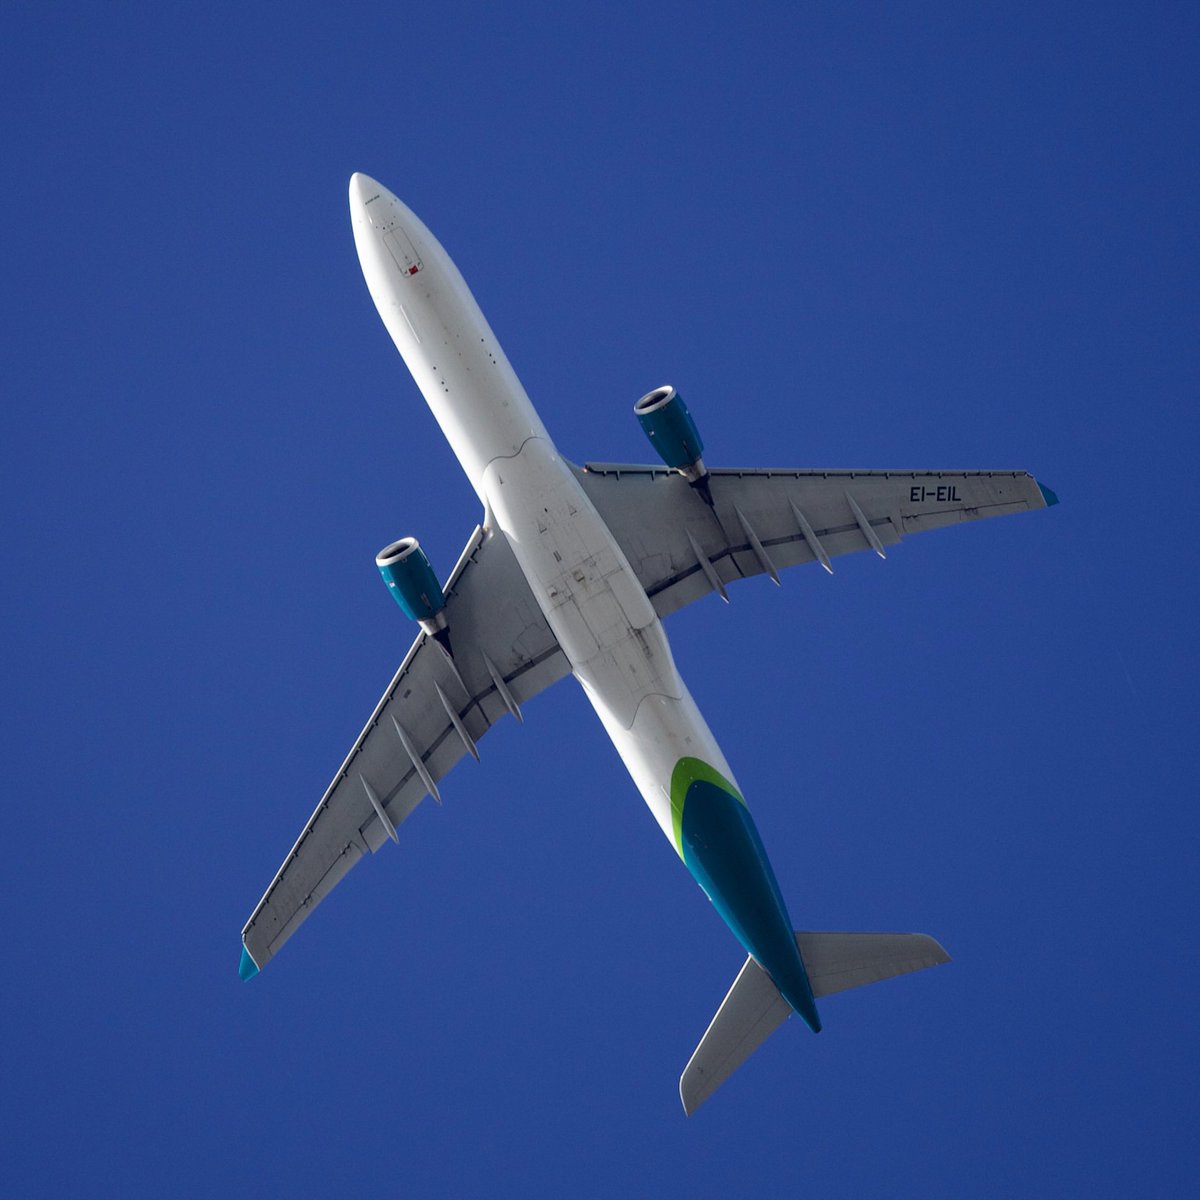 🎶 Look up it’s Aer Lingus…🎶 The weather meant this A330’s flightpath went straight over the club today @ClontarfRugby